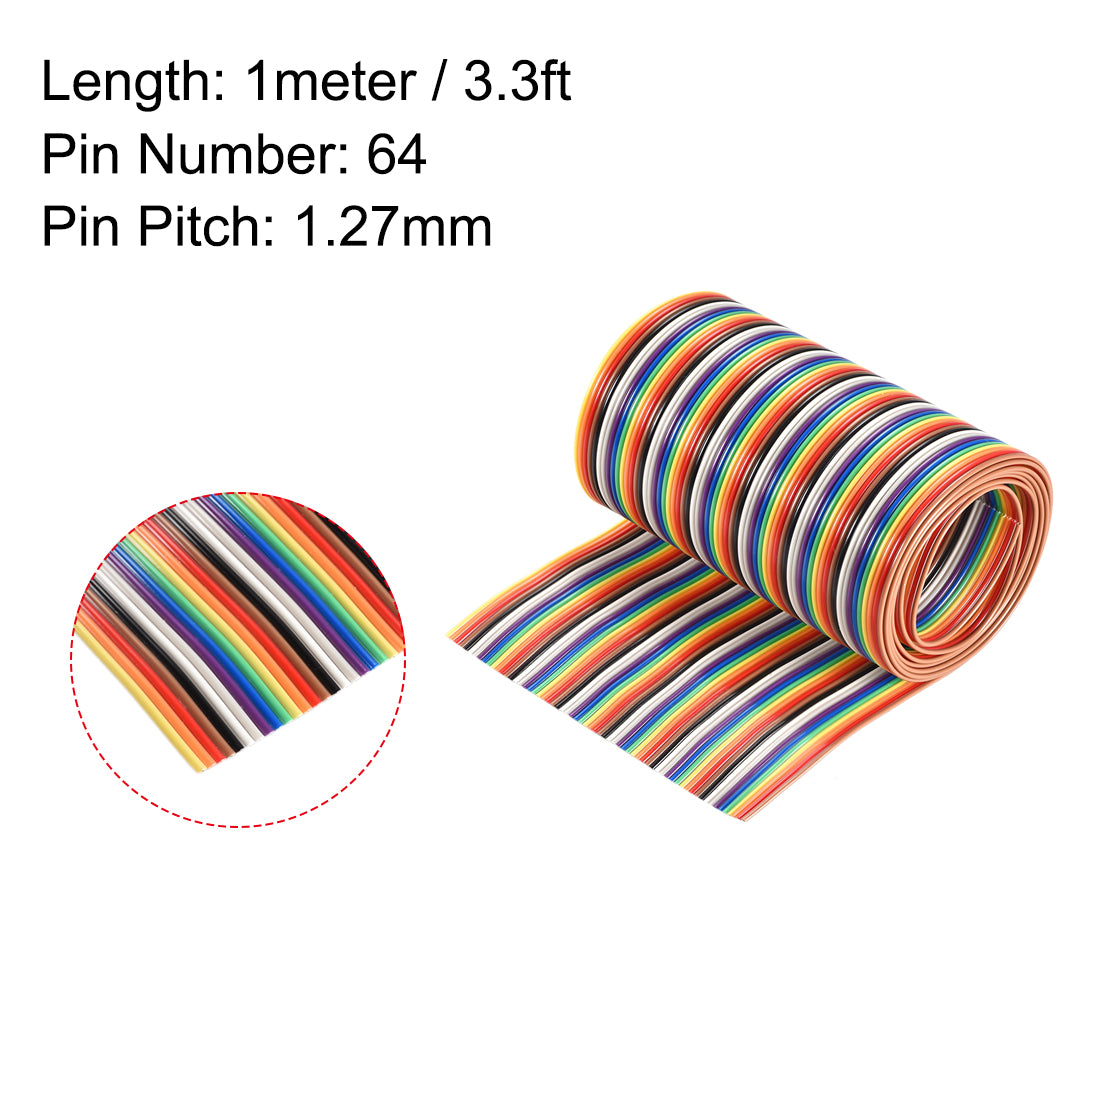 uxcell Uxcell IDC Rainbow Wire Flat Ribbon Cable 64P 1.27mm Pitch 1meter/3.3ft Length